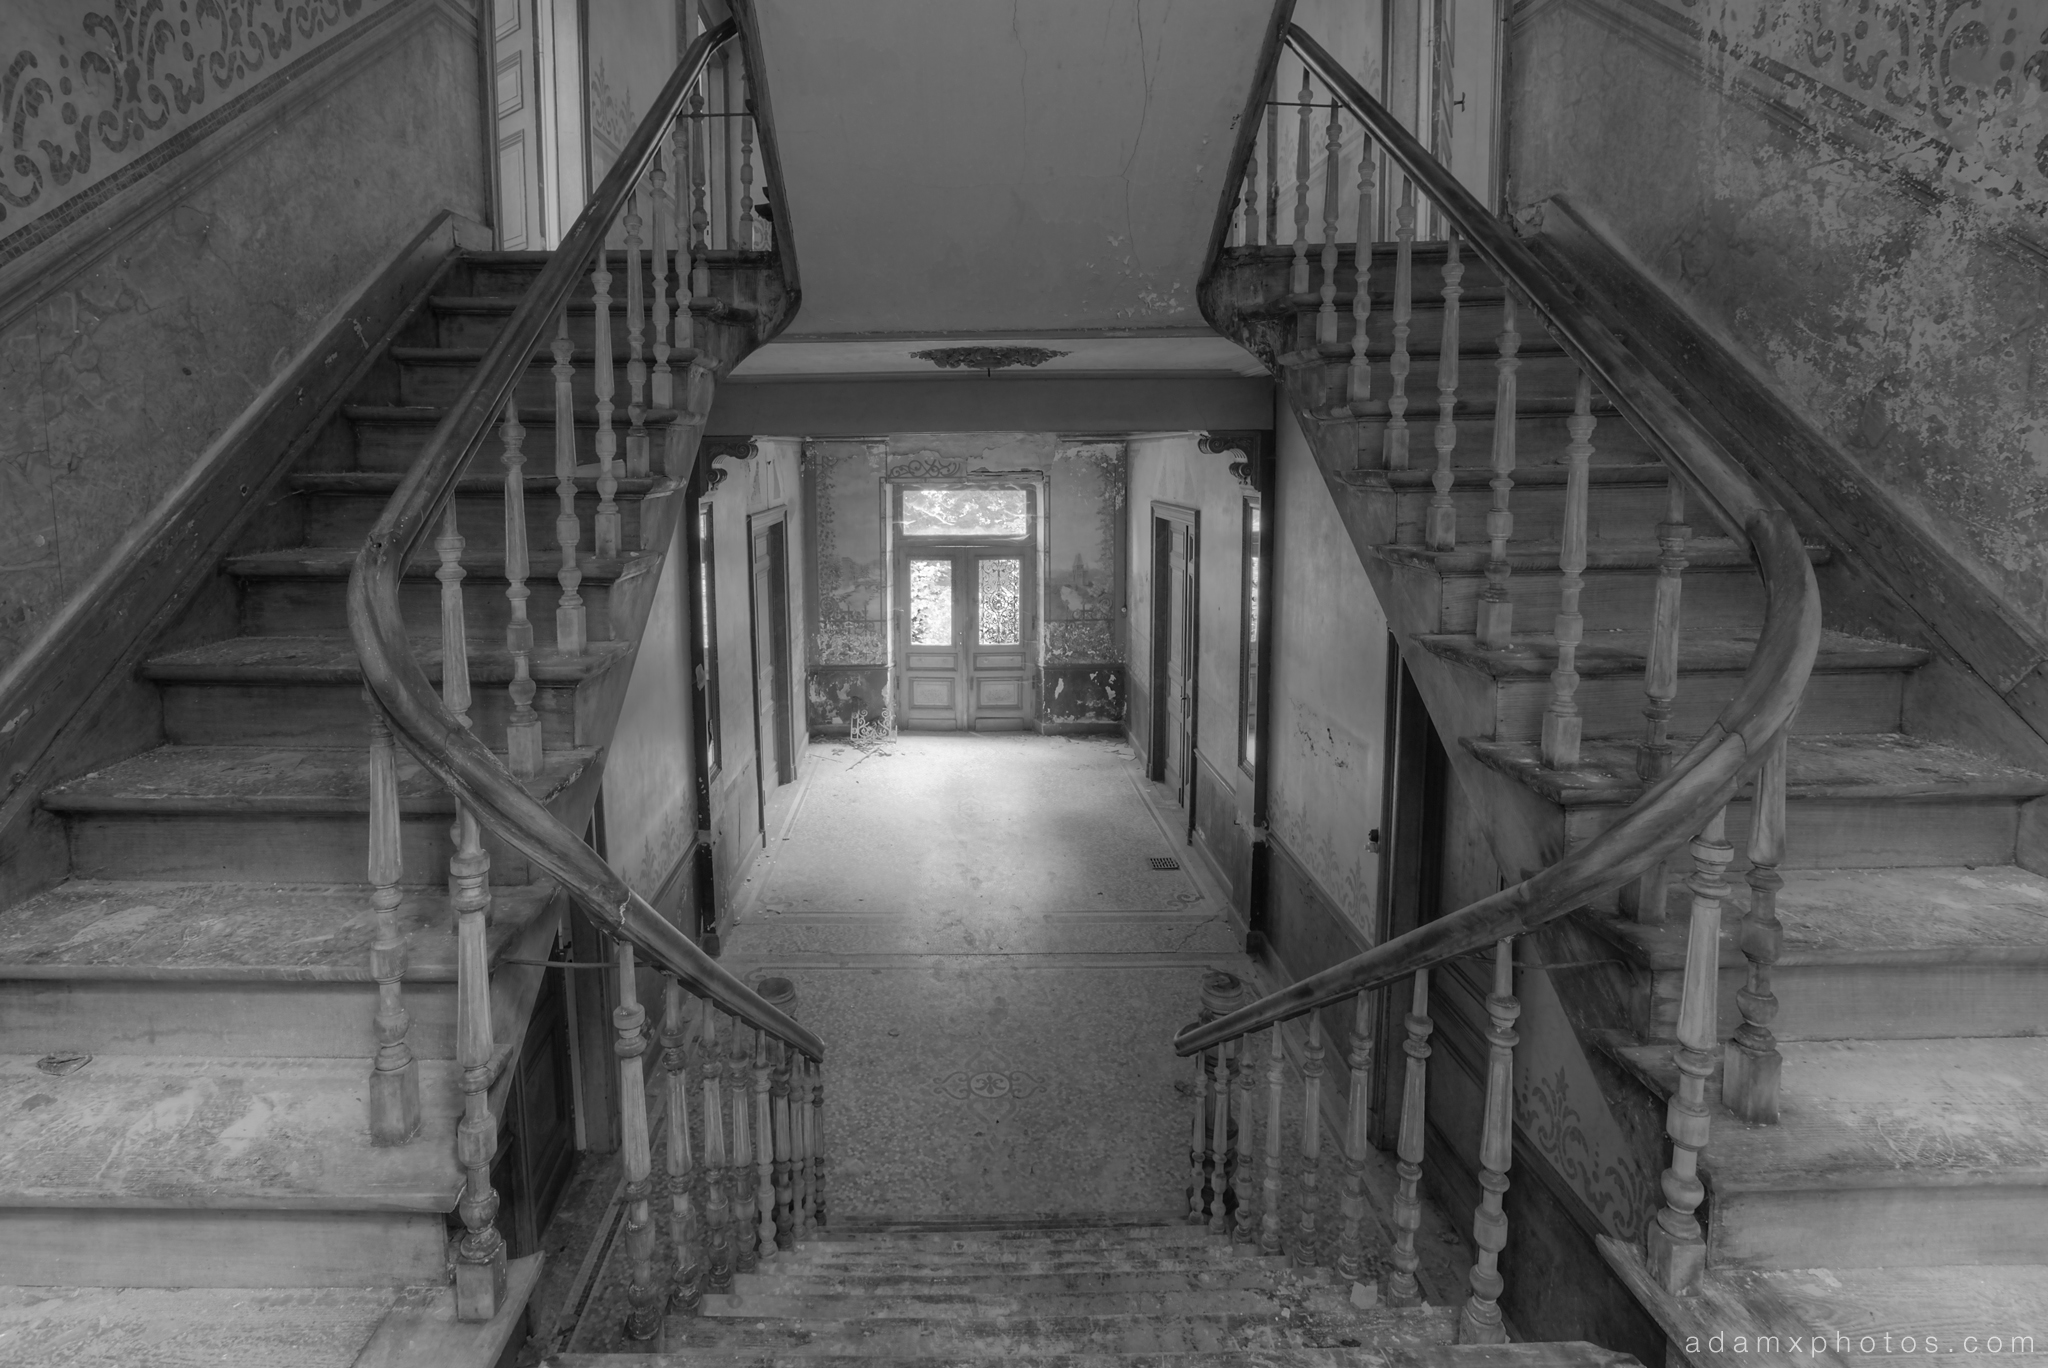 Stairs staircase hallway black and white B&W Adam X Urbex UE Urban Exploration Belgium Chateau d'Ah house maison villa townhouse abandoned derelict unused empty disused decay decayed decaying grimy grime